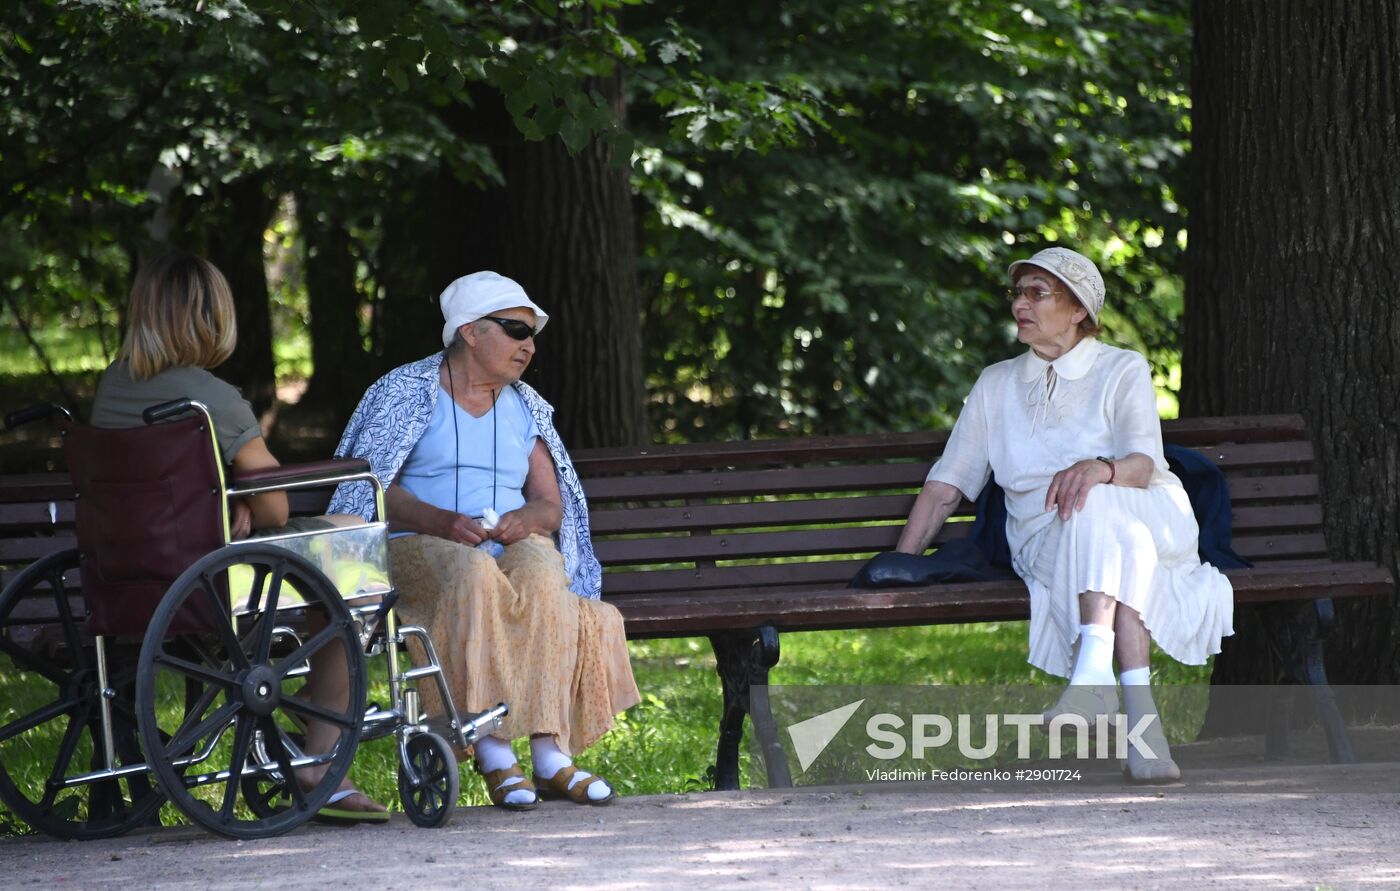 People relax at Moscow's Vorontsovsky Park